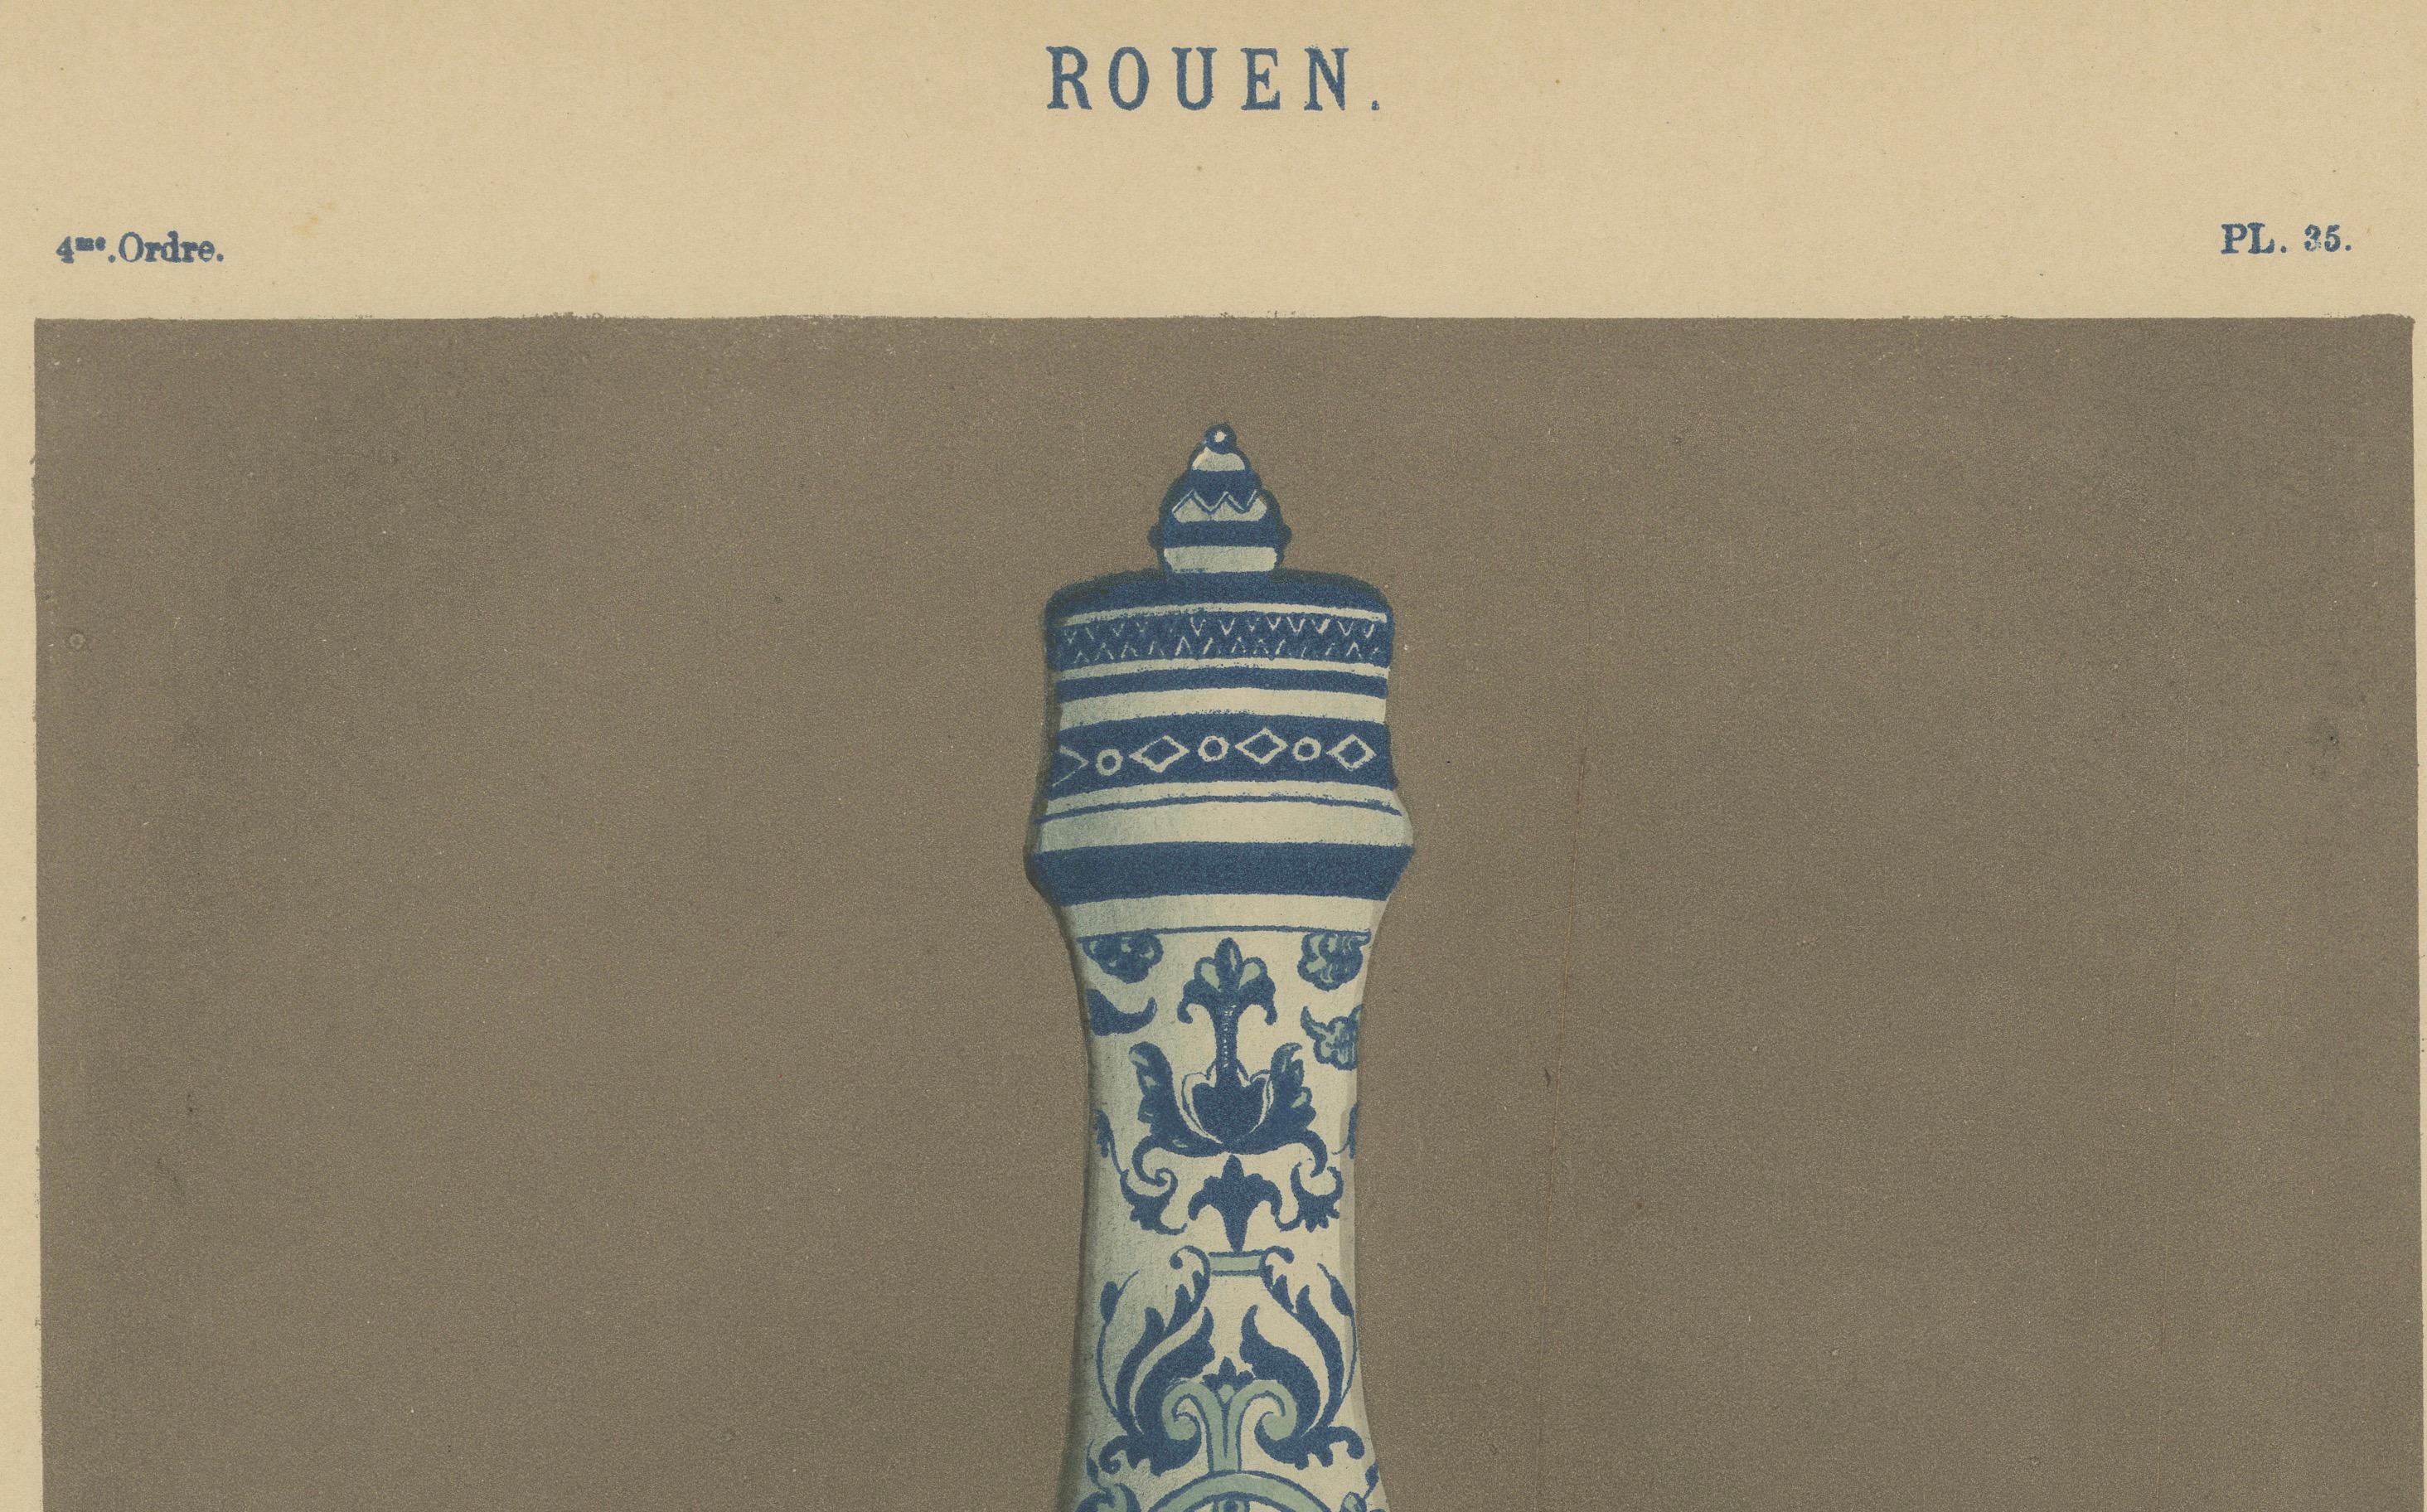 This image is a chromolithograph of a Rouen bottle (